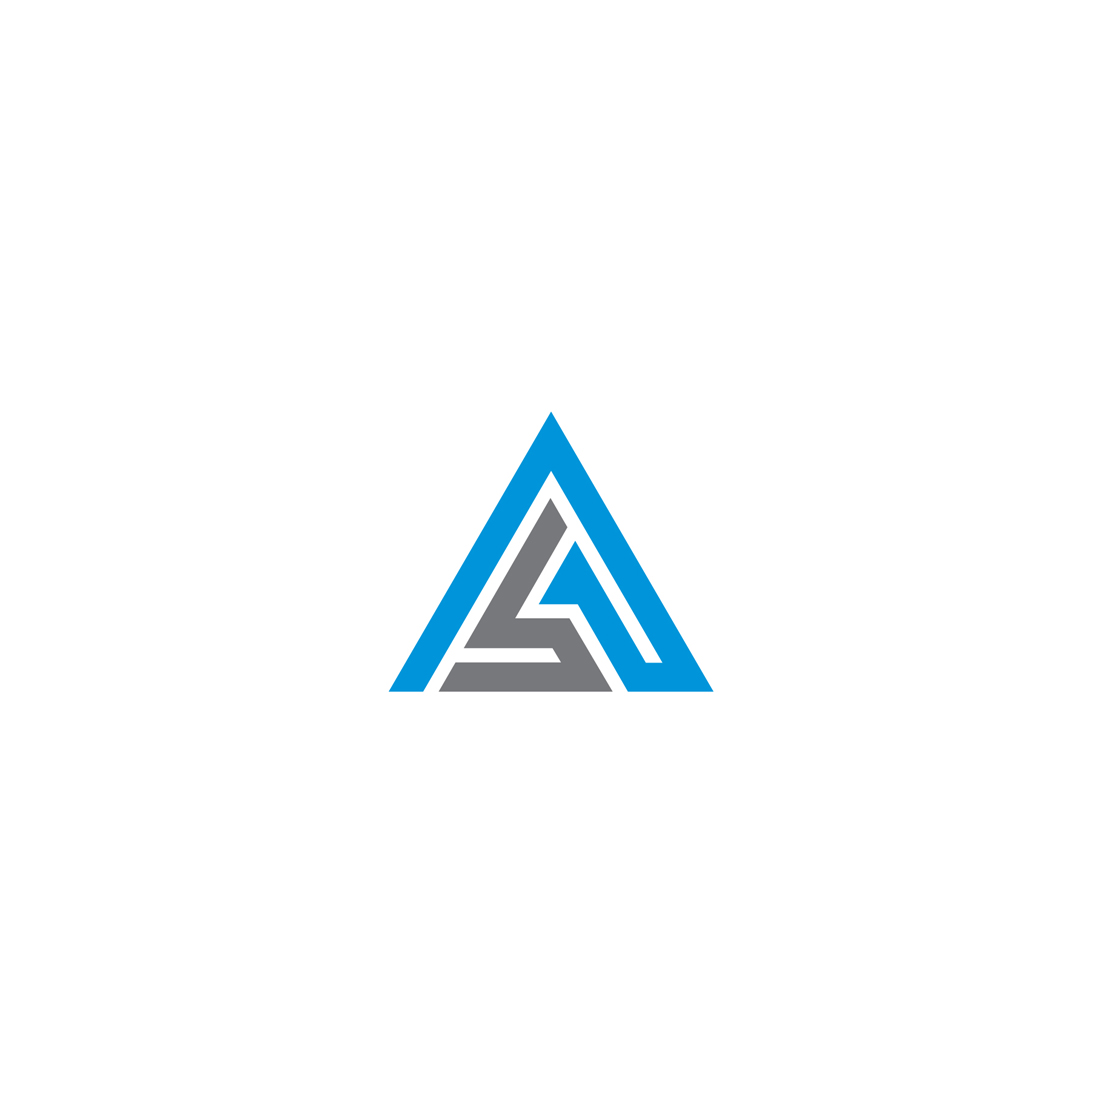 Blue and gray triangle logo on a white background.